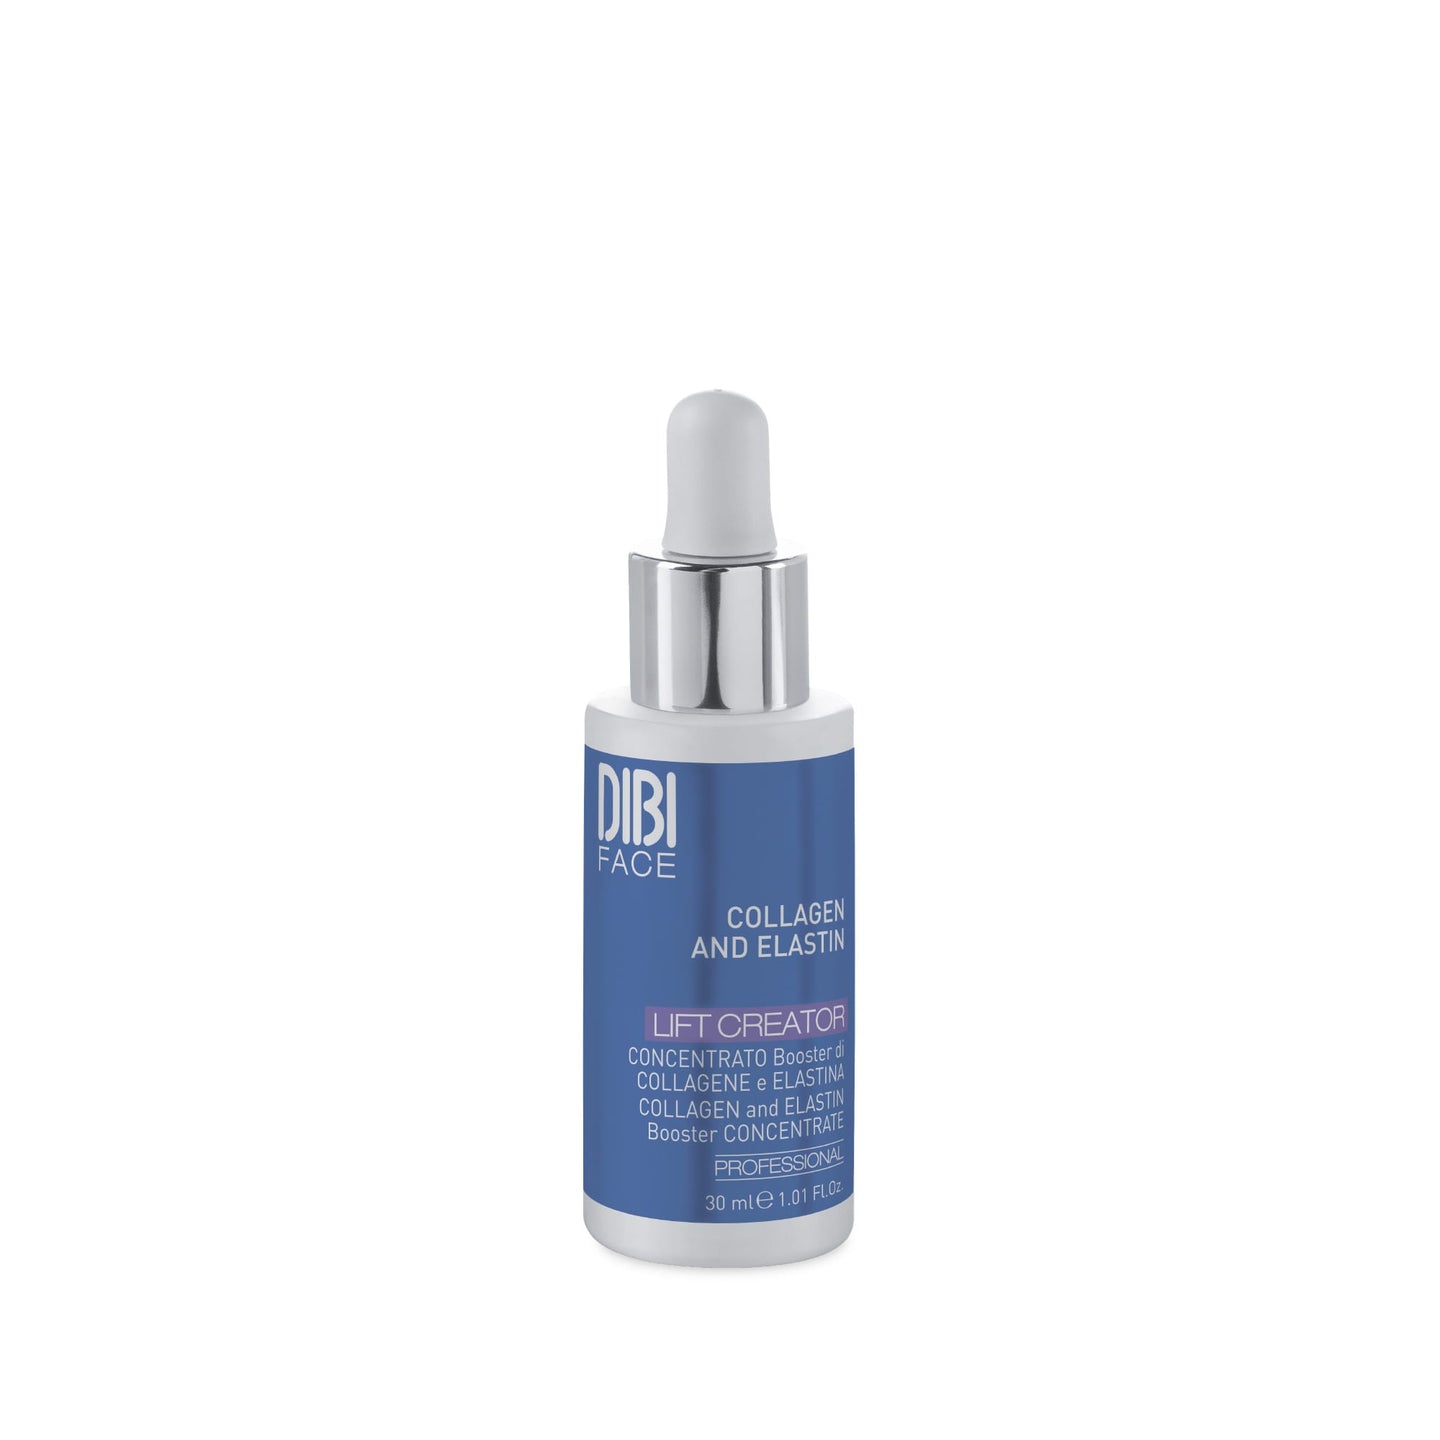 Lift Creator: Collagen & Elastin Booster Concentrate